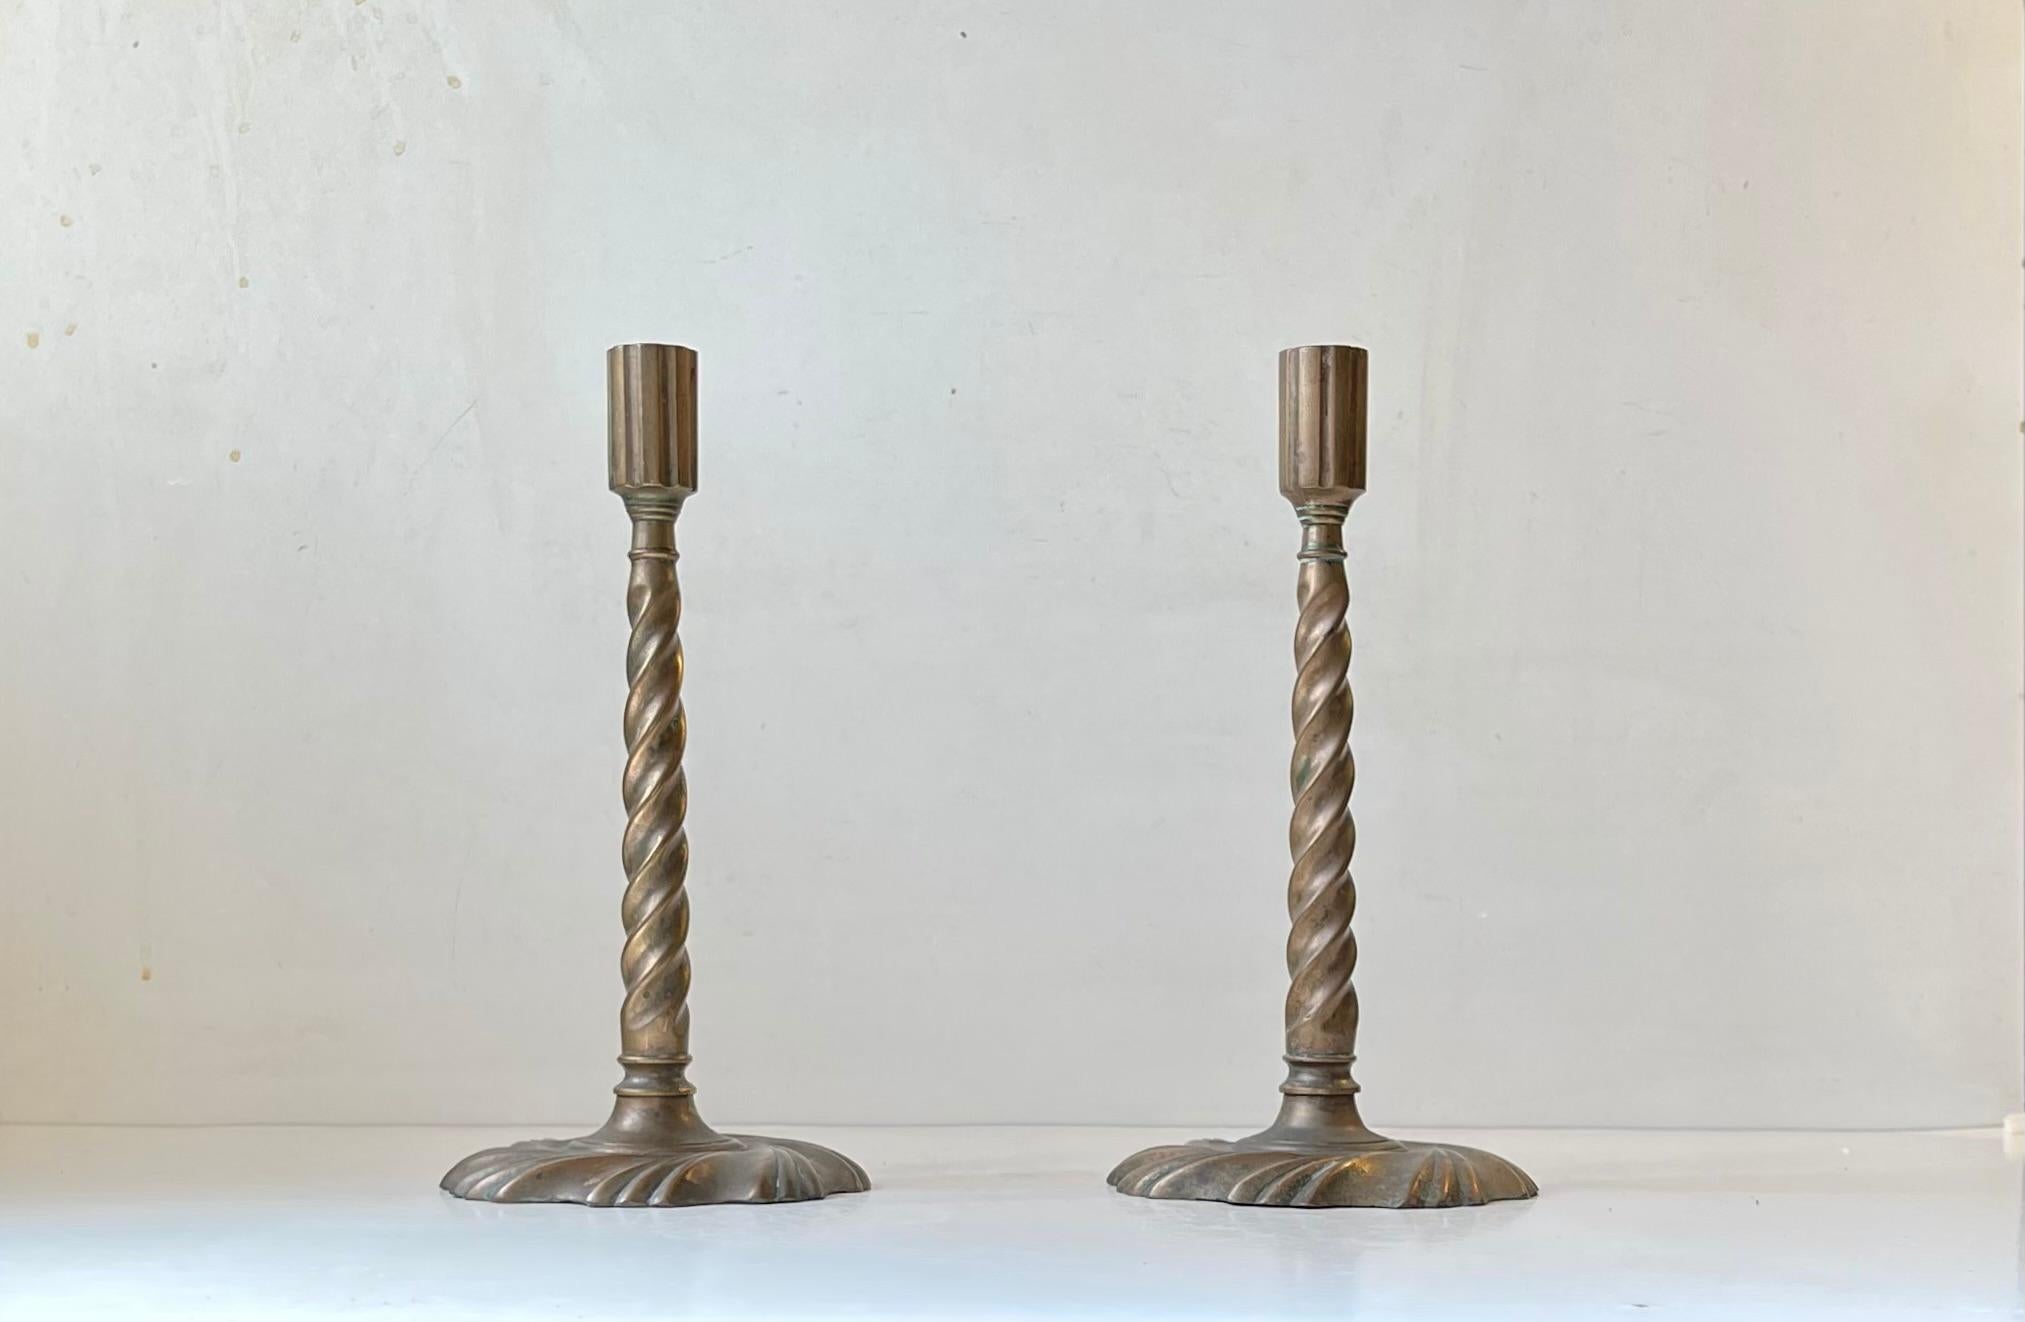 A pair of Barley twisted candlesticks in patinated bronze. Made in Scandinavia or England circa 1850-1880. Great authentic Gothic/Gothic revival look due to the excessive patina and stylized beautifully cast details. They are to be installed with